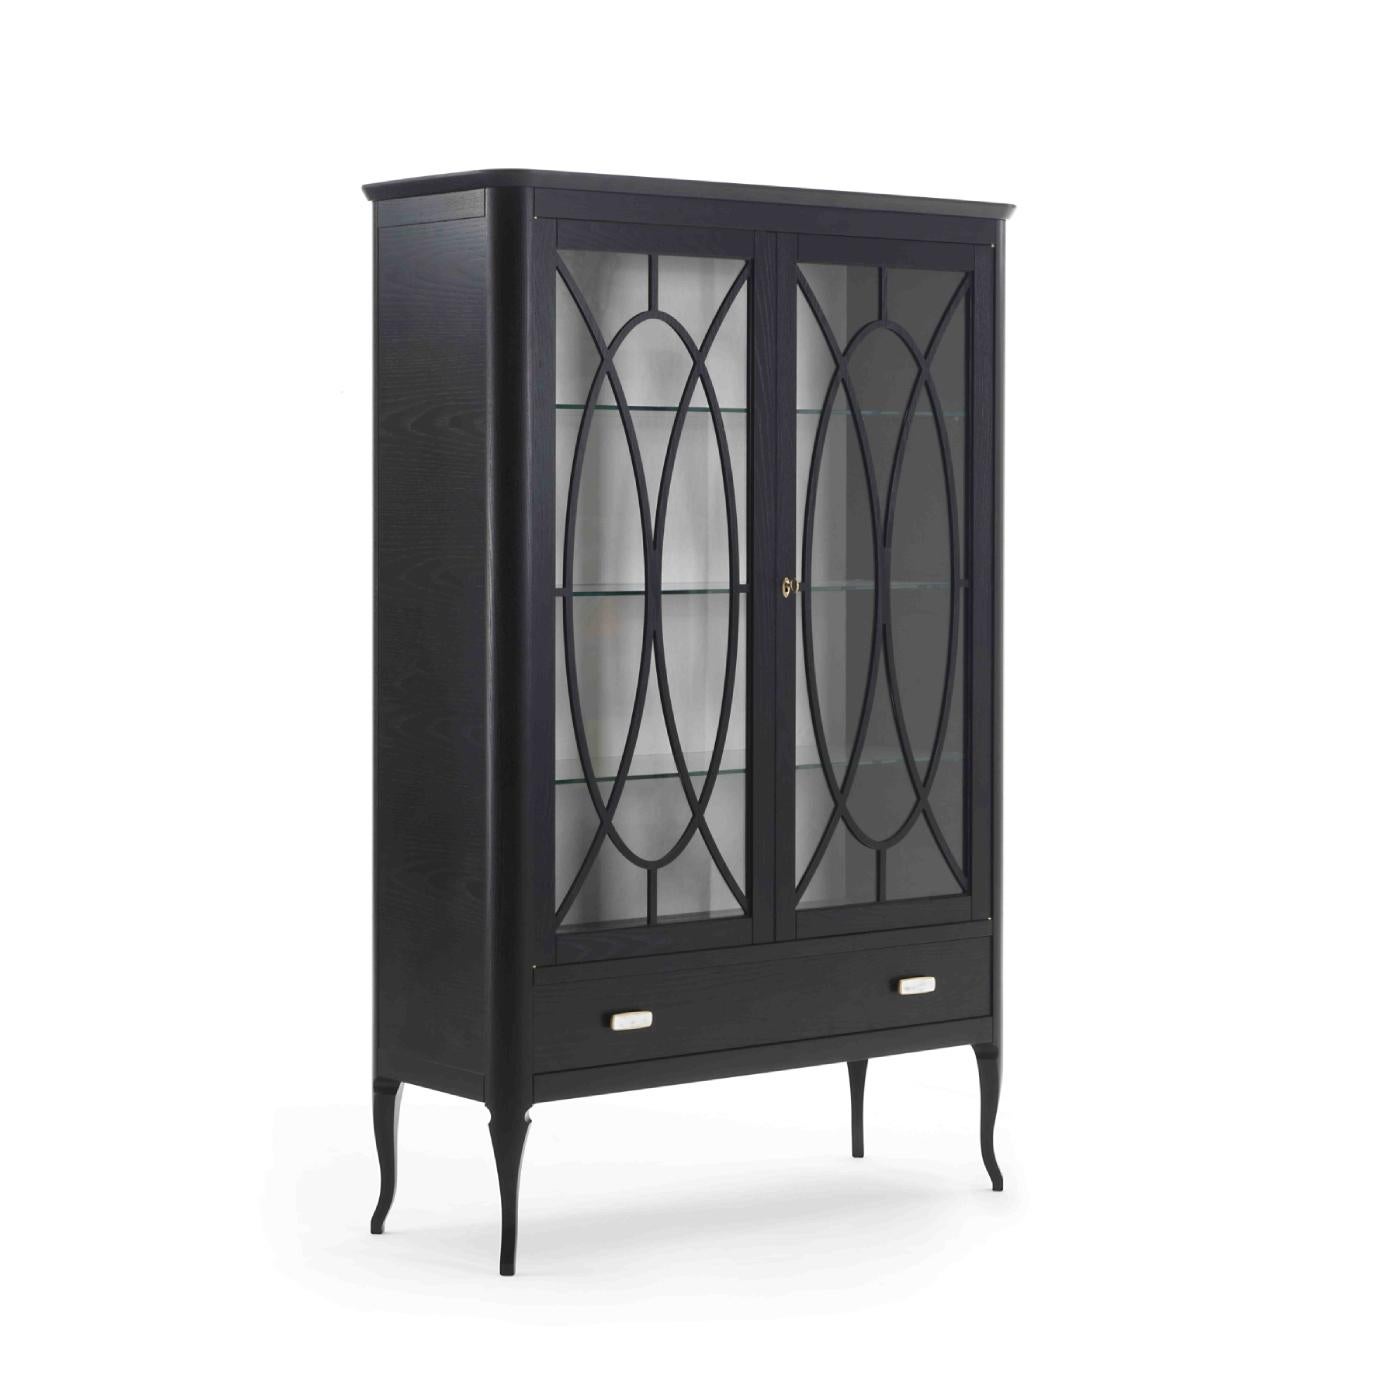 Fashioned of wood with ash veneer and ebonized finish, this refined display cabinet features a rectangular frame with cabriole legs and two glass doors accented with an open design of intersecting ovals and a single oval brass knob. The interior has